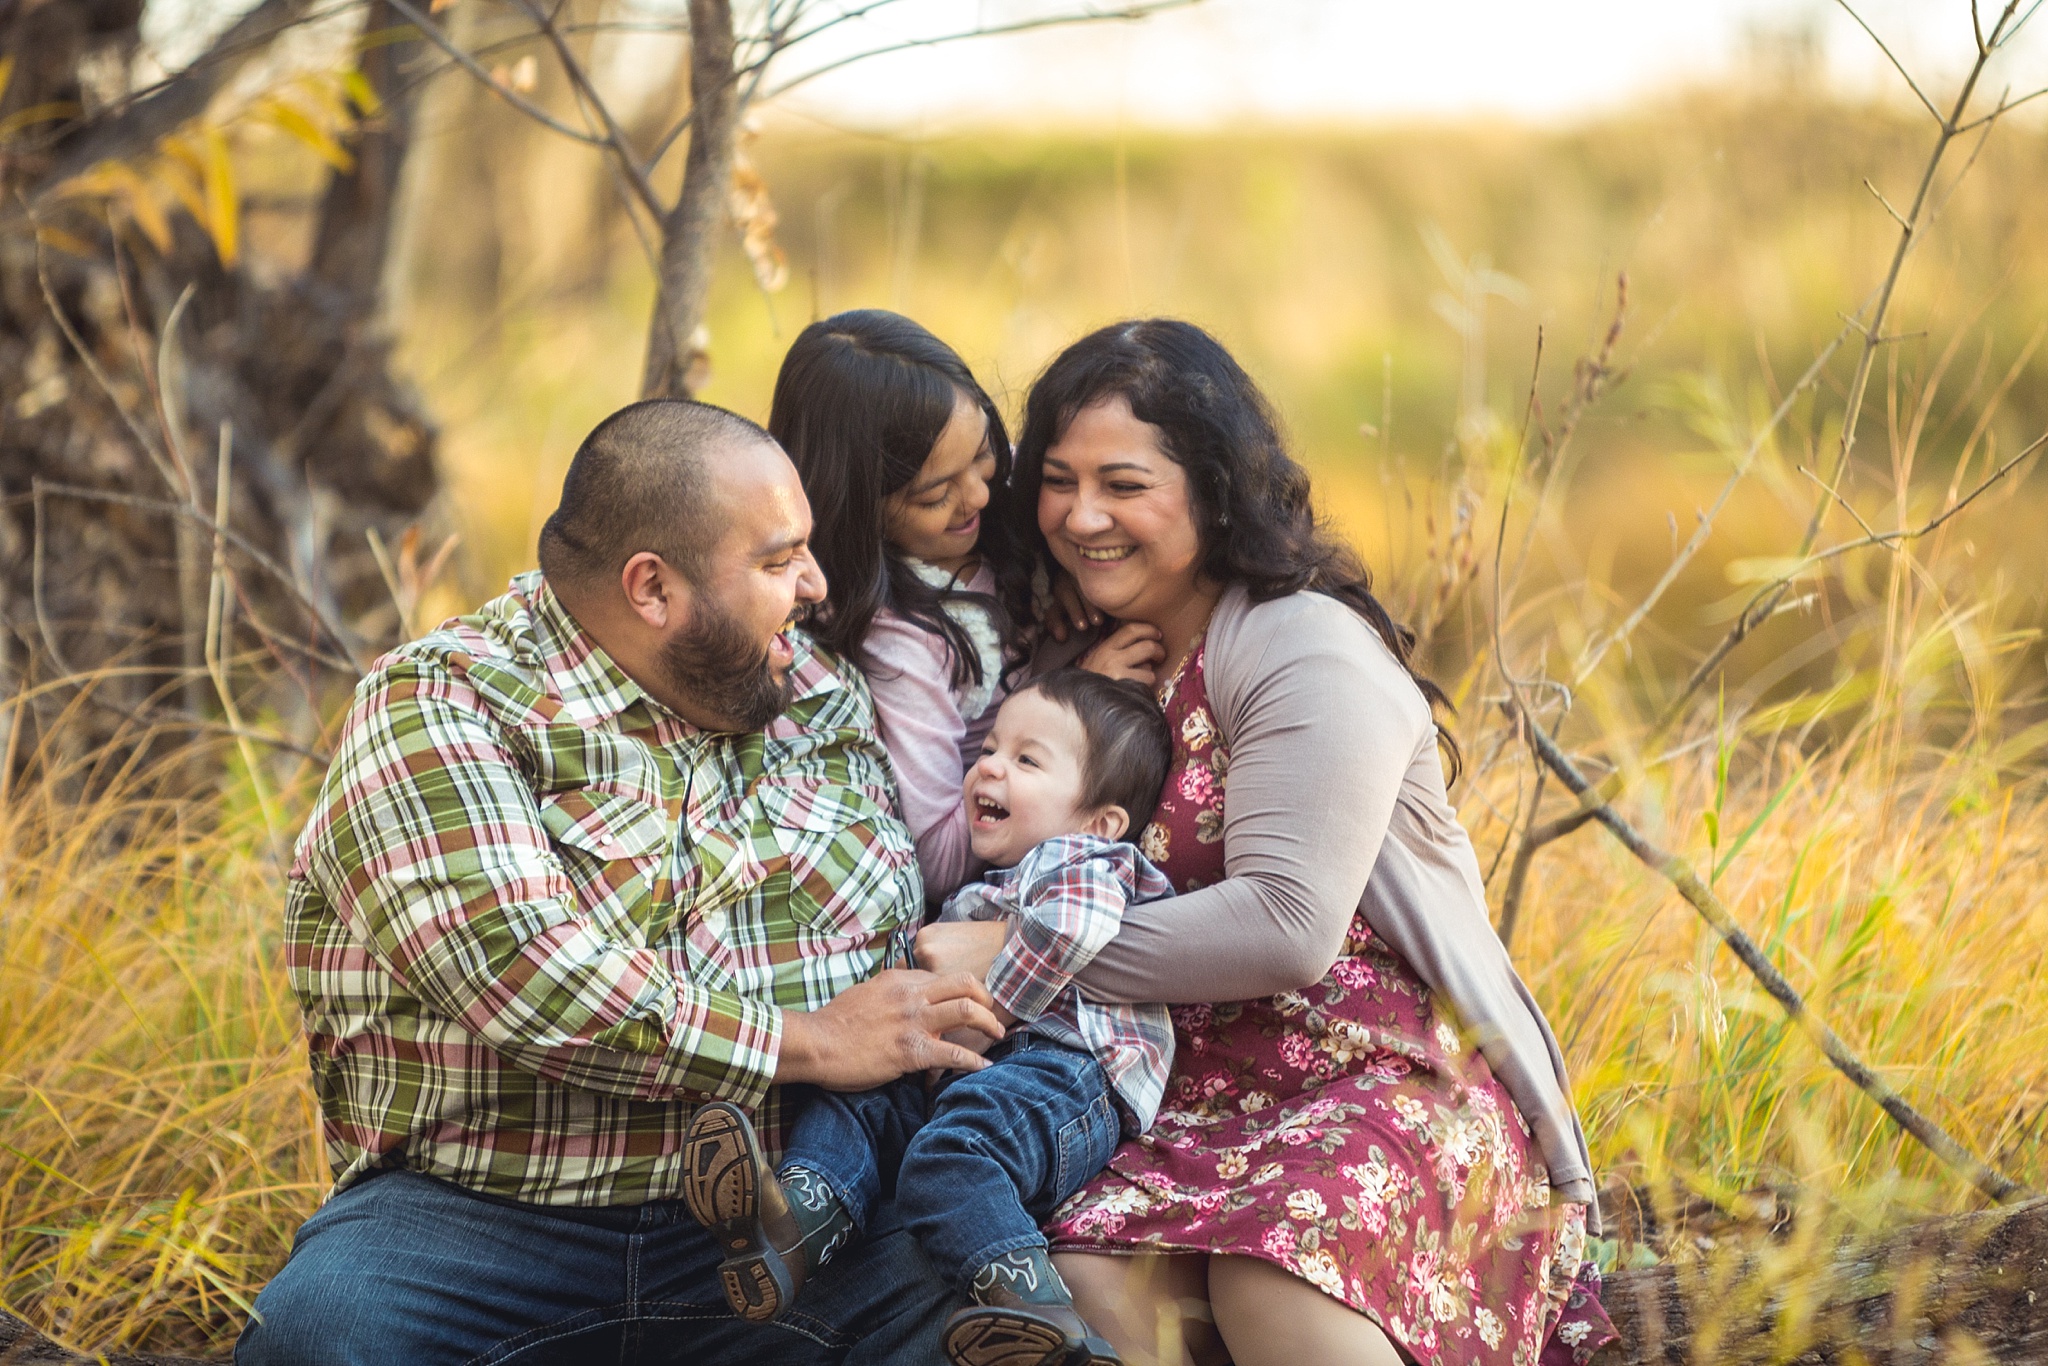 Cute family playing during fall family portraits. The Aguayo Family’s Fall Family Photo Session at Golden Ponds Nature Area by Colorado Family Photographer, Jennifer Garza. Golden Ponds Nature Area Family Photographer, Golden Ponds Nature Area, Golden Ponds, Golden Ponds Family Photographer, Longmont Family Photography, Longmont Family Photographer, Colorado Family Photos, Colorado Family Photographer, Colorado Fall Photos, Fall Photos